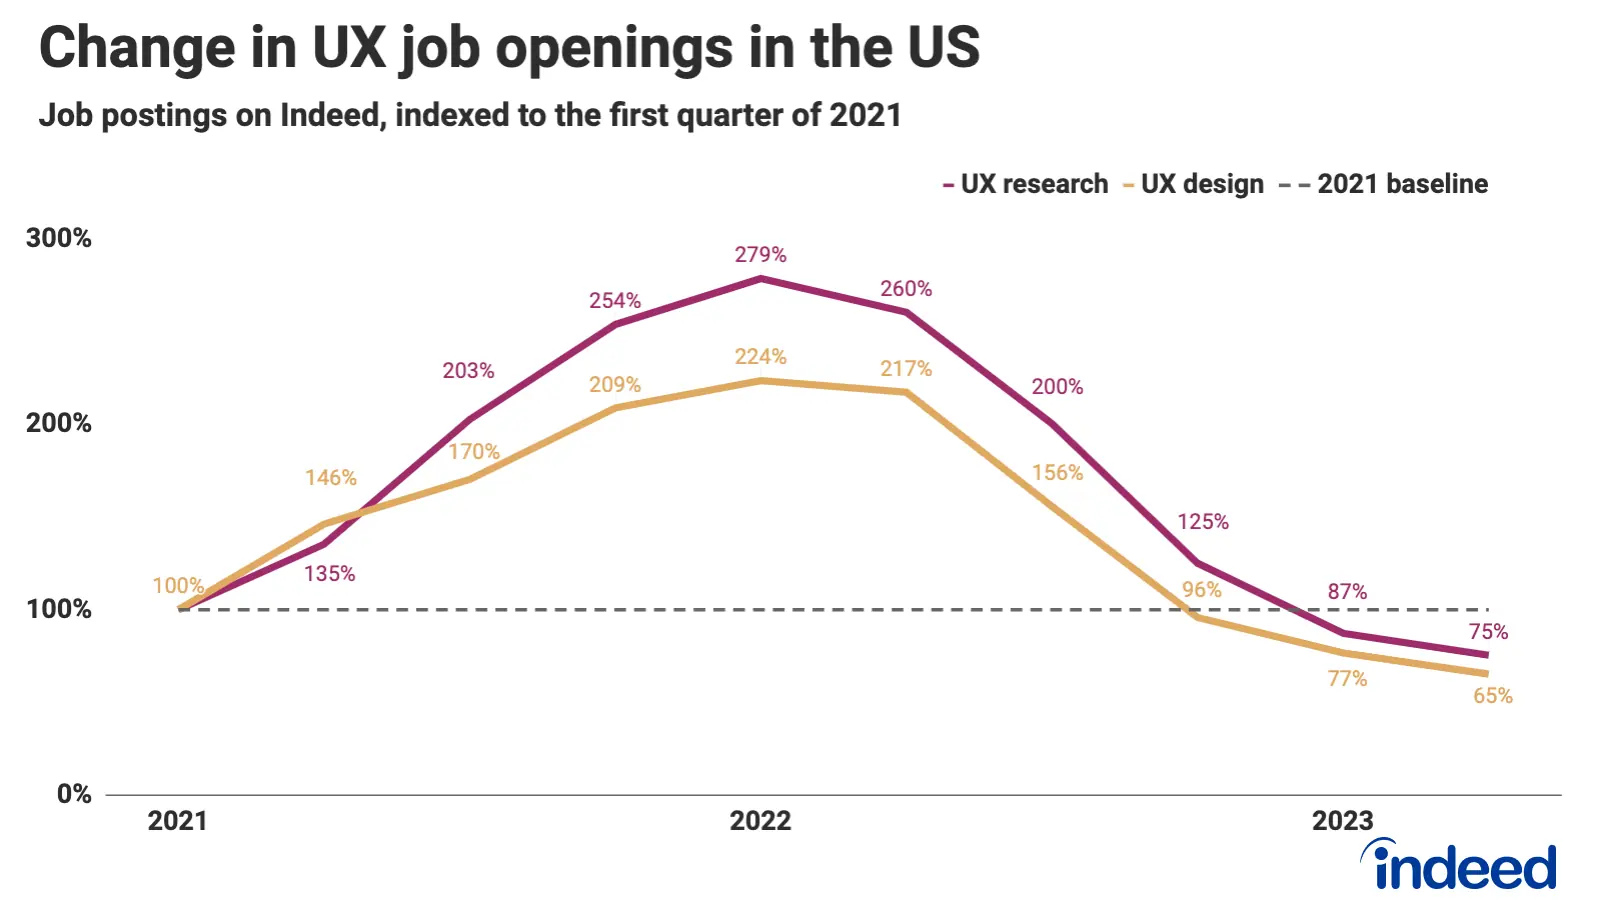 UX research job posts were 100% in Q1 2021, 279% in Q1 2022, and 75% in Q2 2023; UX design rose to 224%, fell to 65%